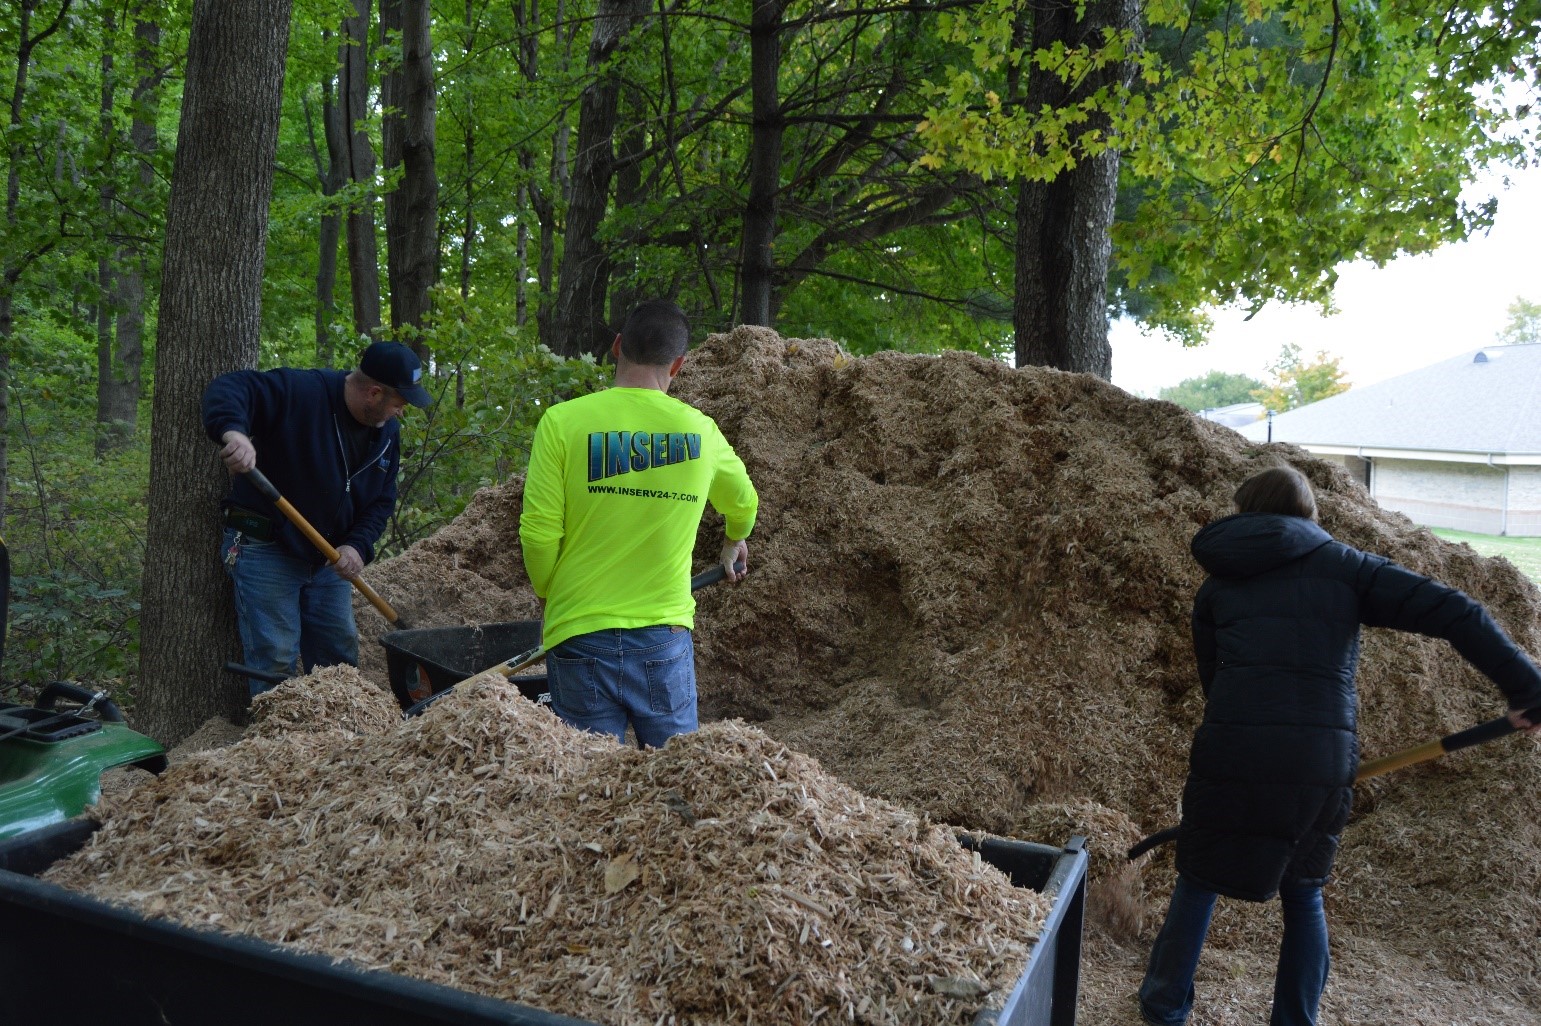 bulk mulch pile with inserv employees moving